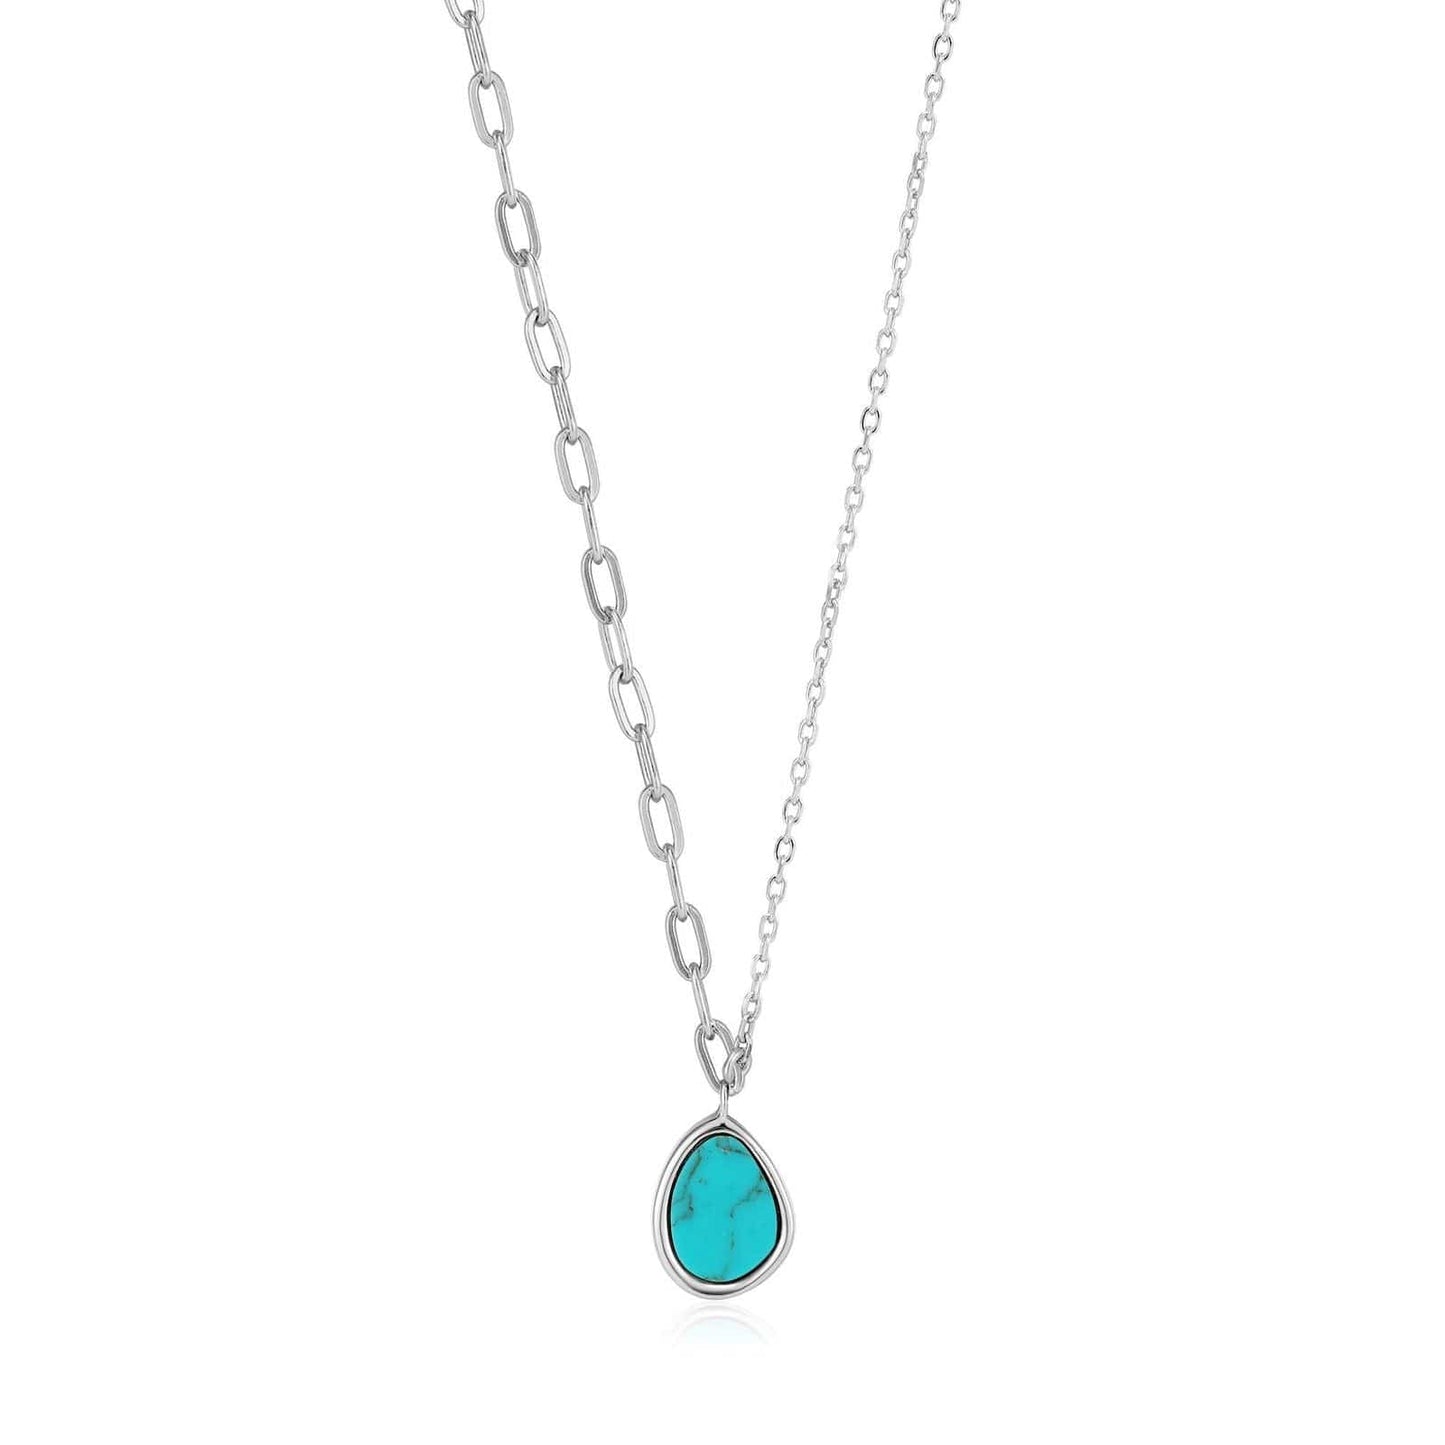 NKL Silver Tidal Turquoise Mixed Link Necklace